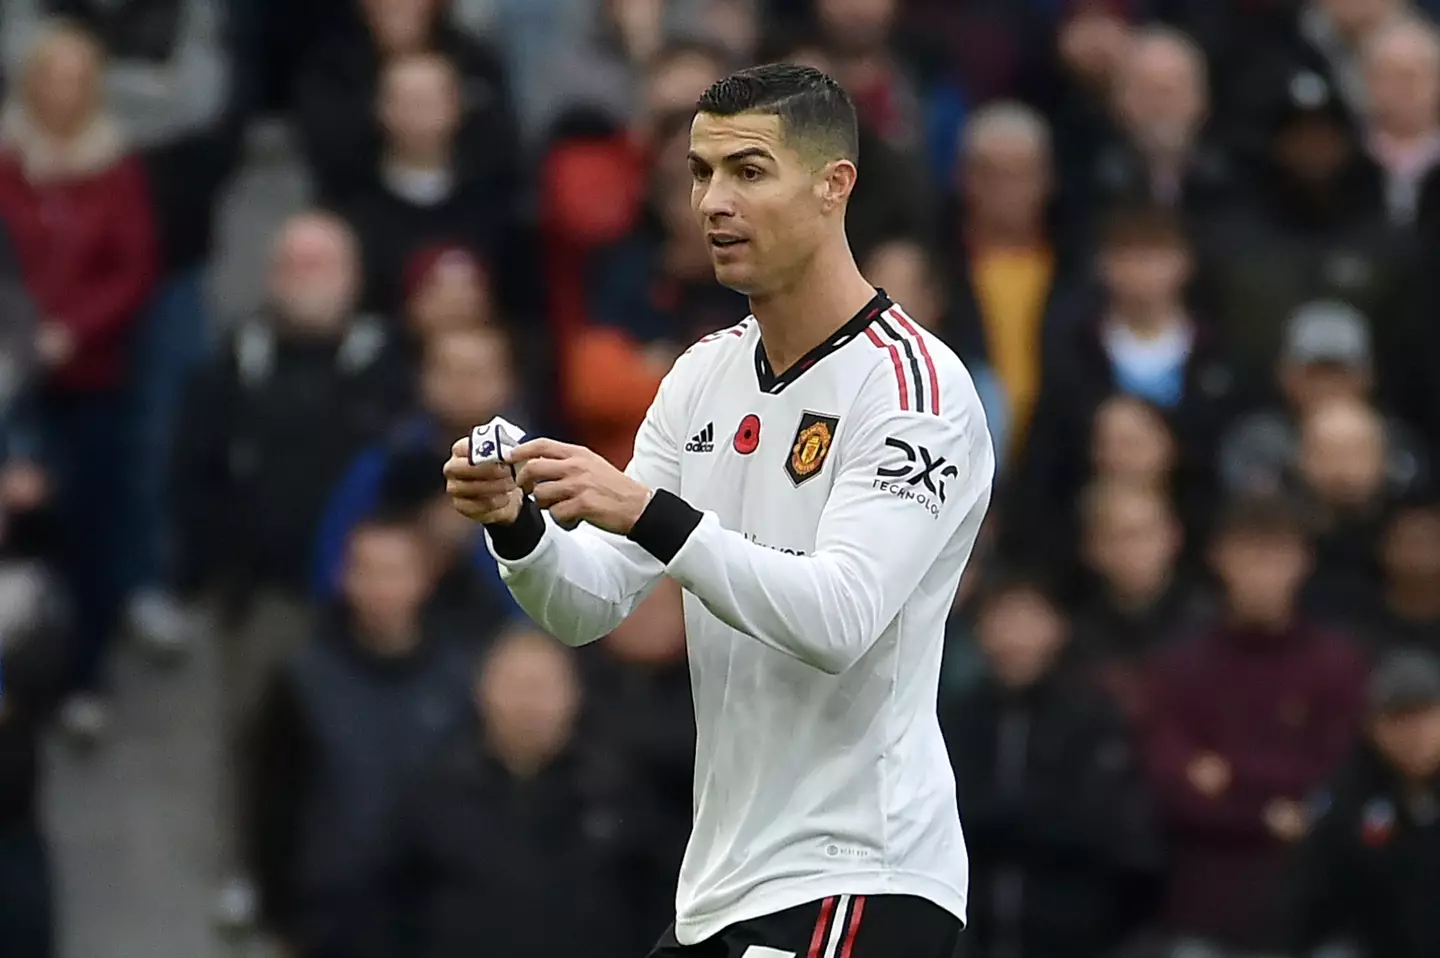 Ronaldo's second spell at United is ending in dramatic fashion. (Image